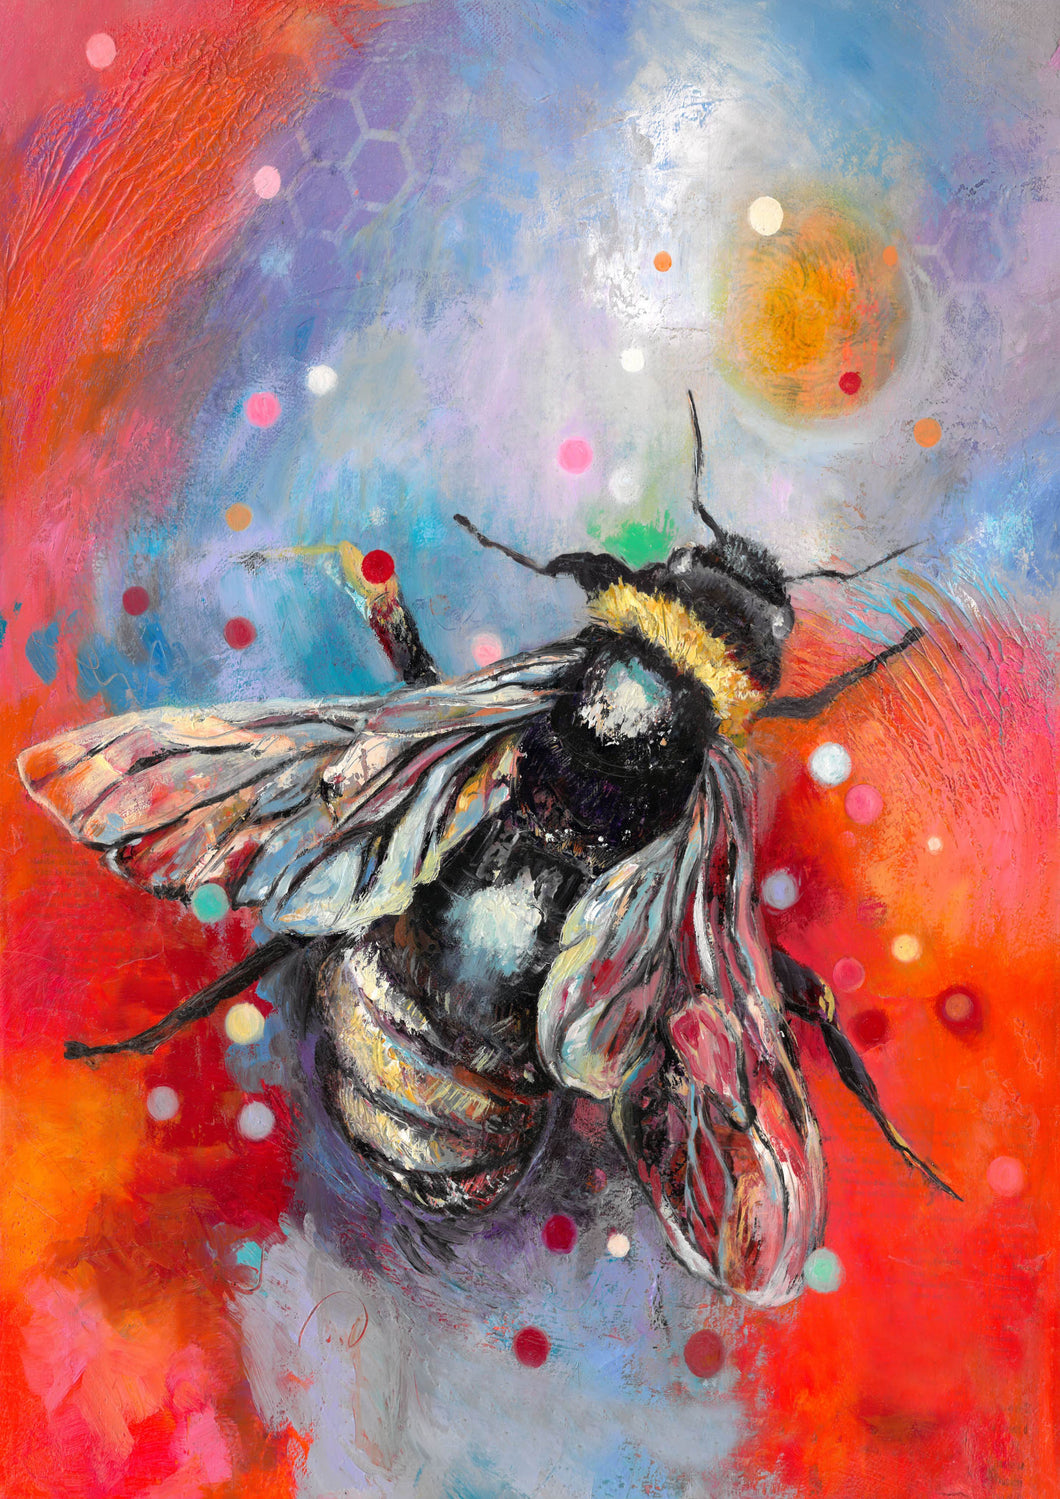 Queen Bee- Modern Bee Painting, Oil on Canvas by artist Katie Jarman